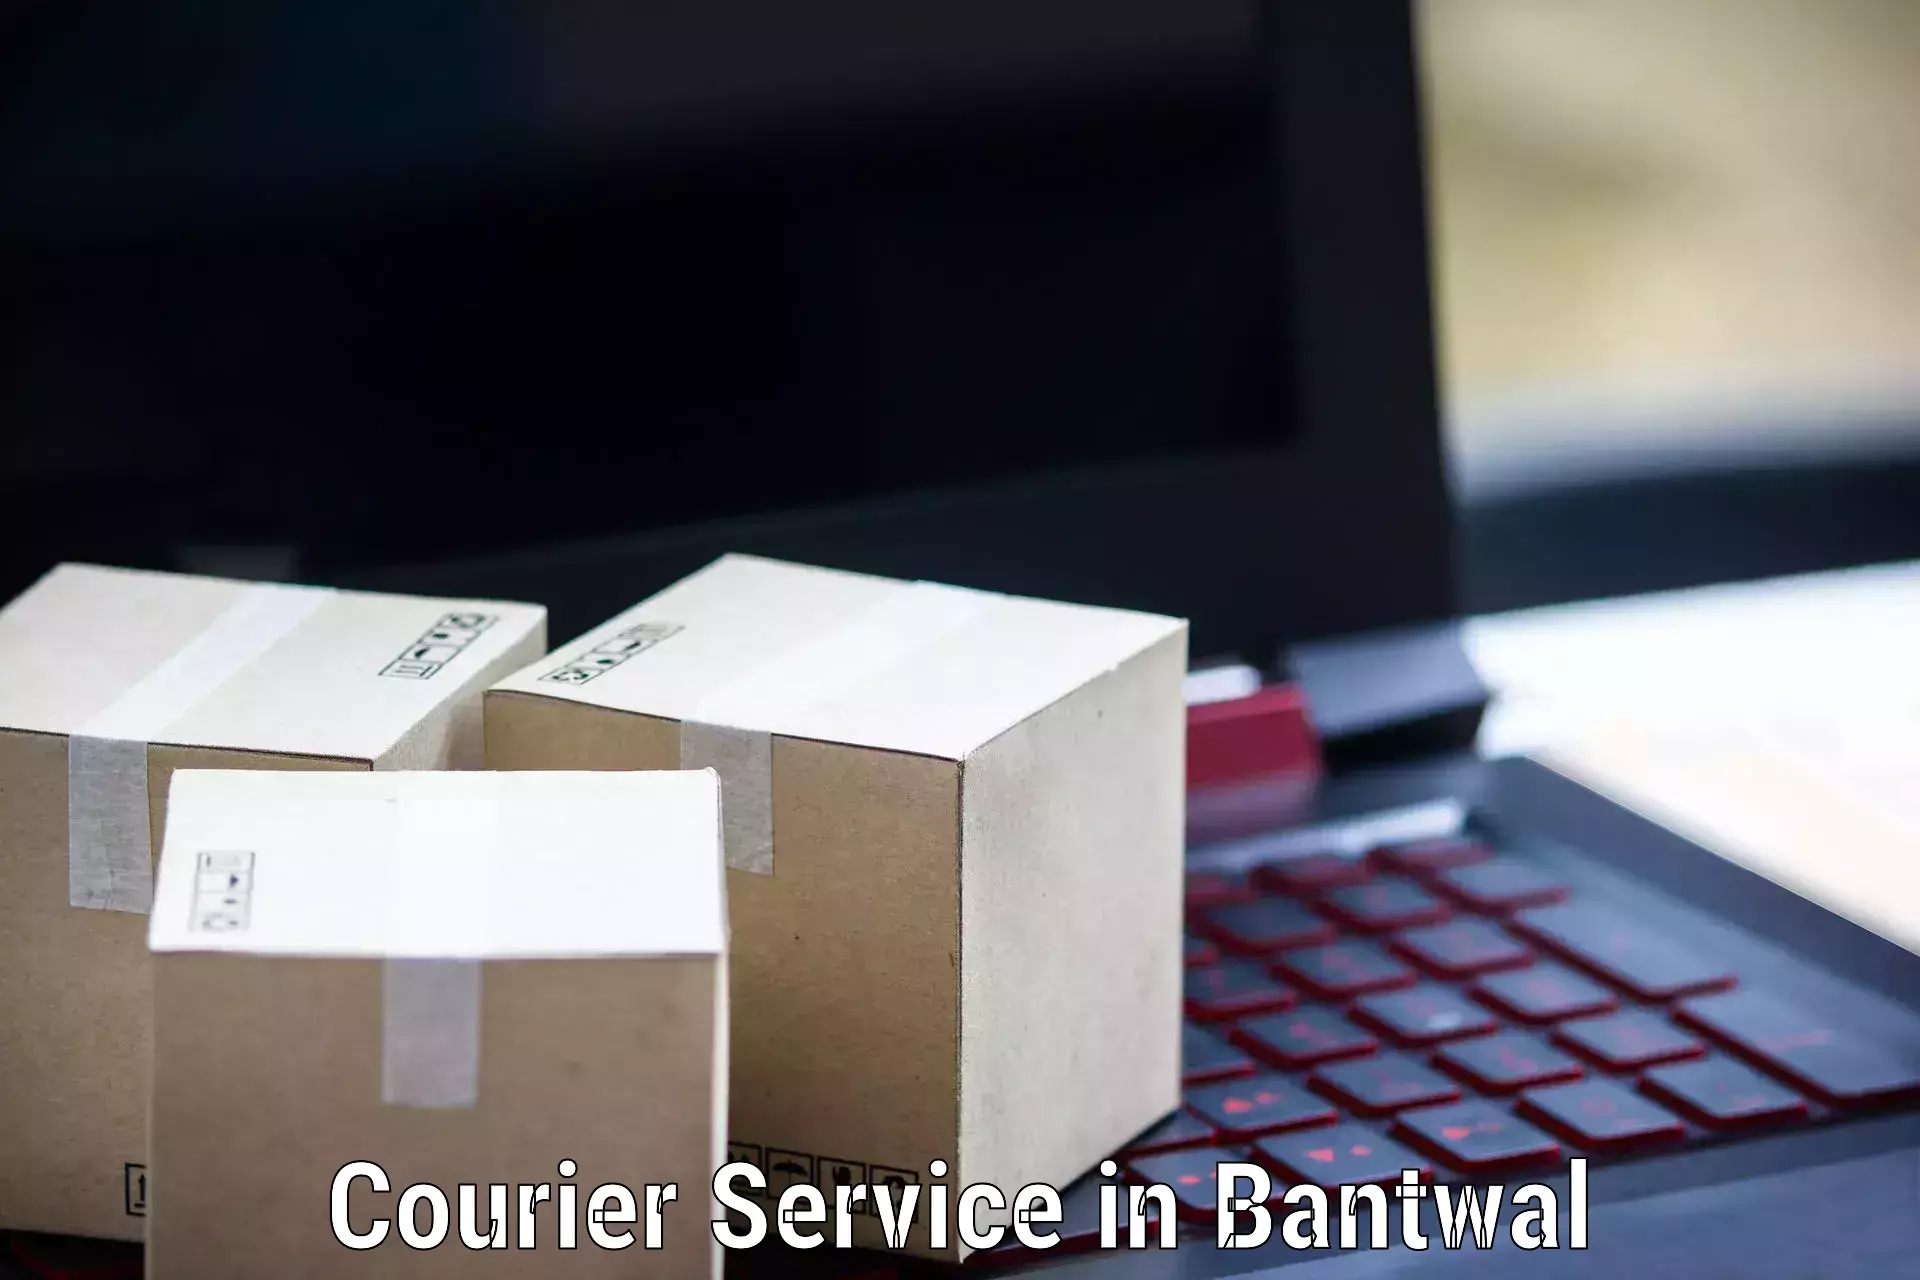 Flexible delivery schedules in Bantwal